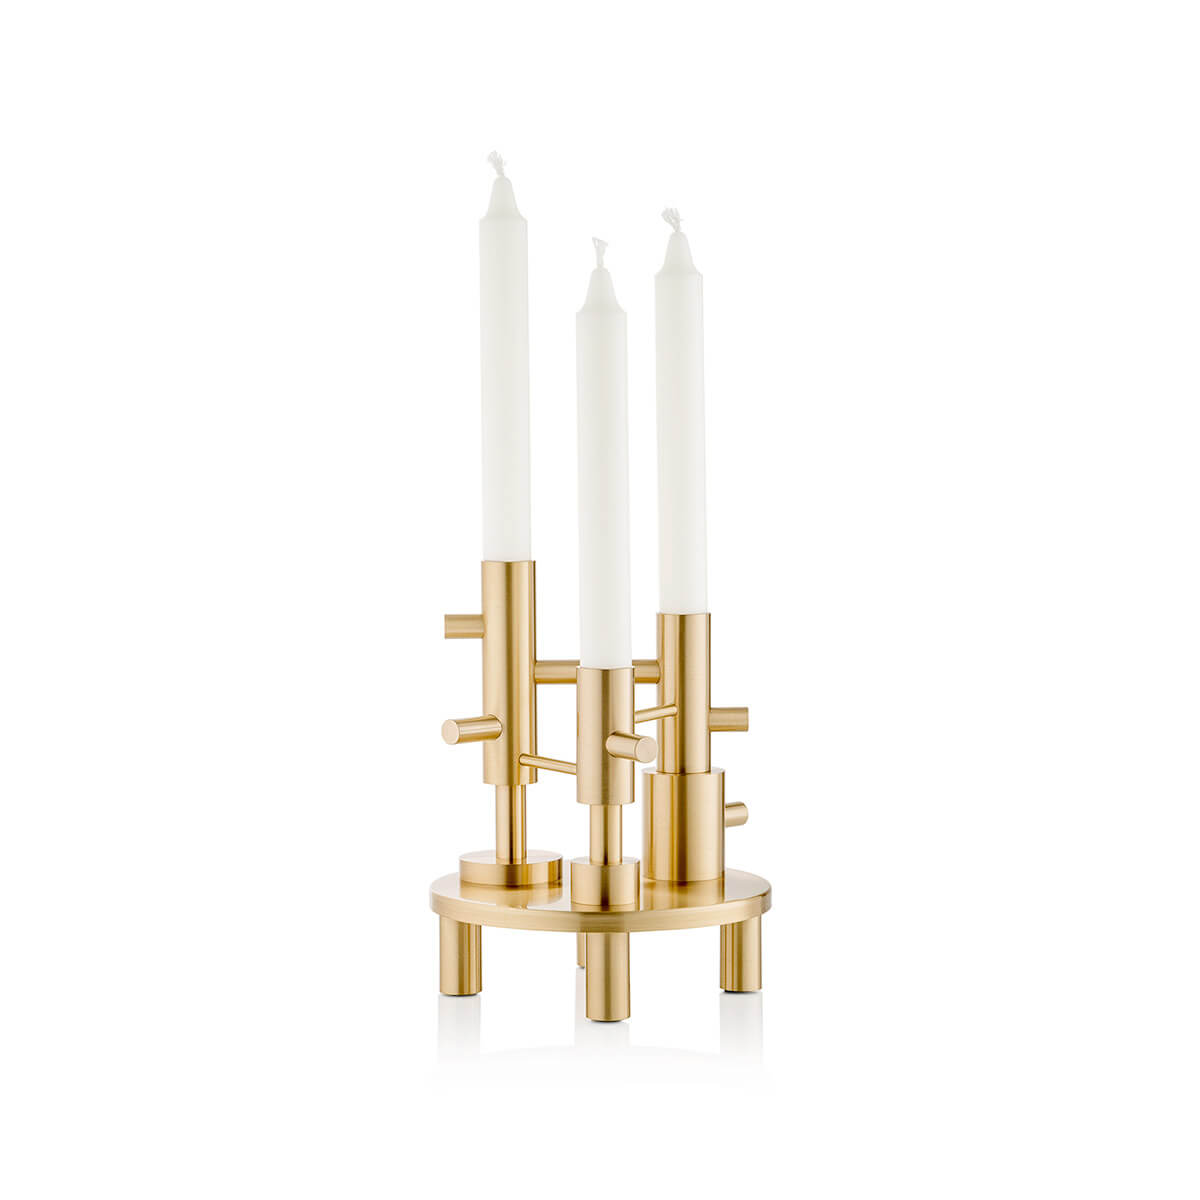 Luminaire Home Decor > Candle Holders Collection: Pillar Floor Candle Holder,  Cell Candle Holders, Lotta Vase or Lantern and much more